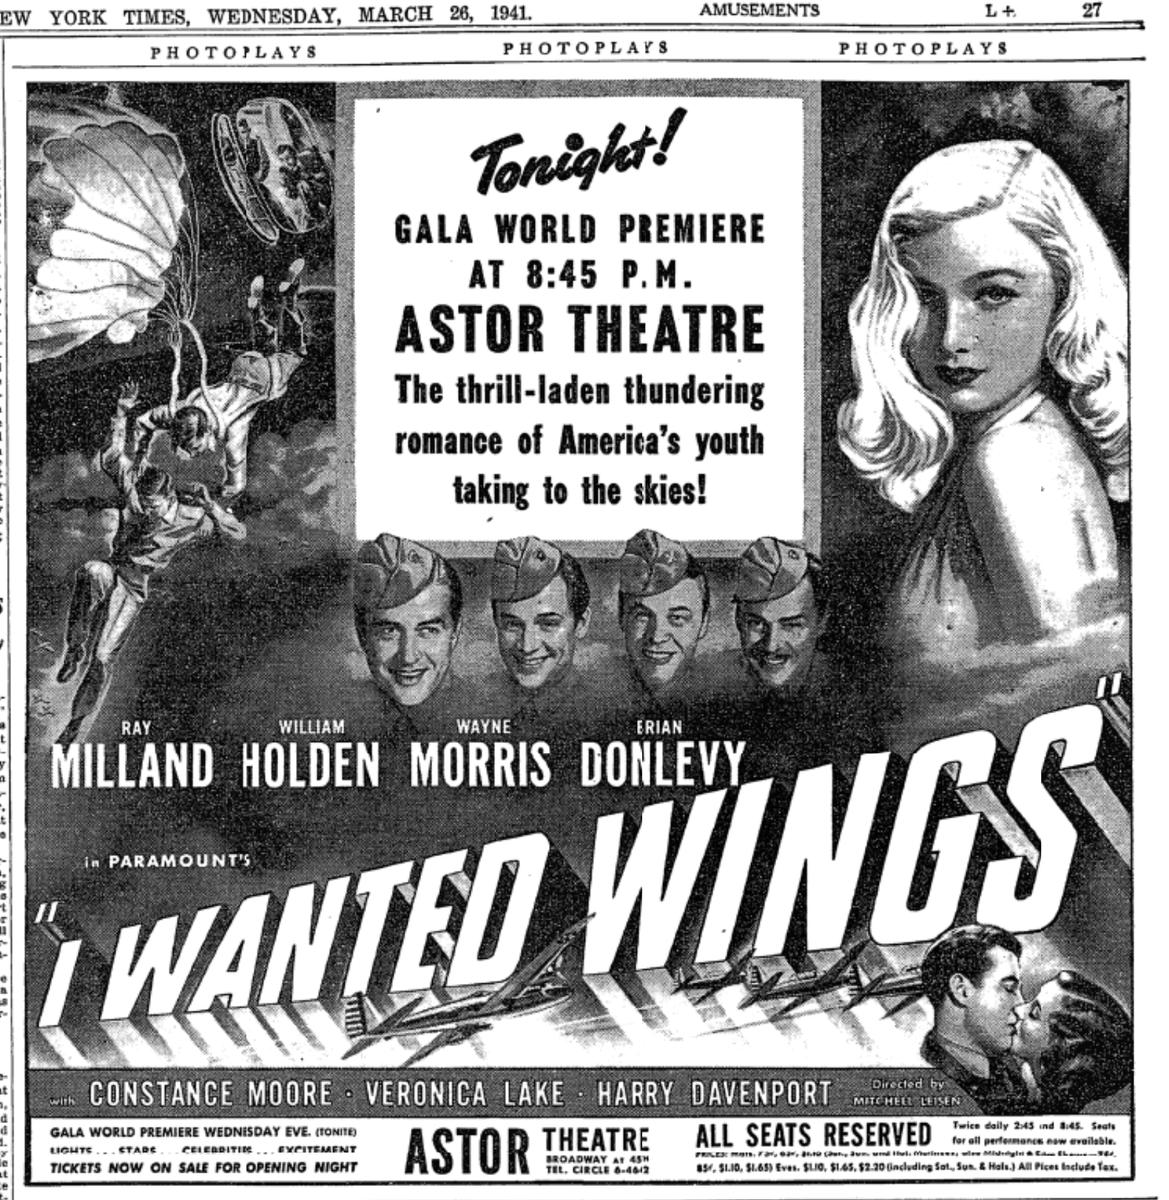 MitchellLeisen's I WANTED WINGS had its GalaWorldPremiere OTD in 1941 at NYC's AstorTheatre. A well-rec'd drama about Army Air Corps    recruits, it featured a not-yet 18 yr-old VeronicaLake when filming began in Aug. 1940 who was dubbed  'the find of 1941' for good reason.